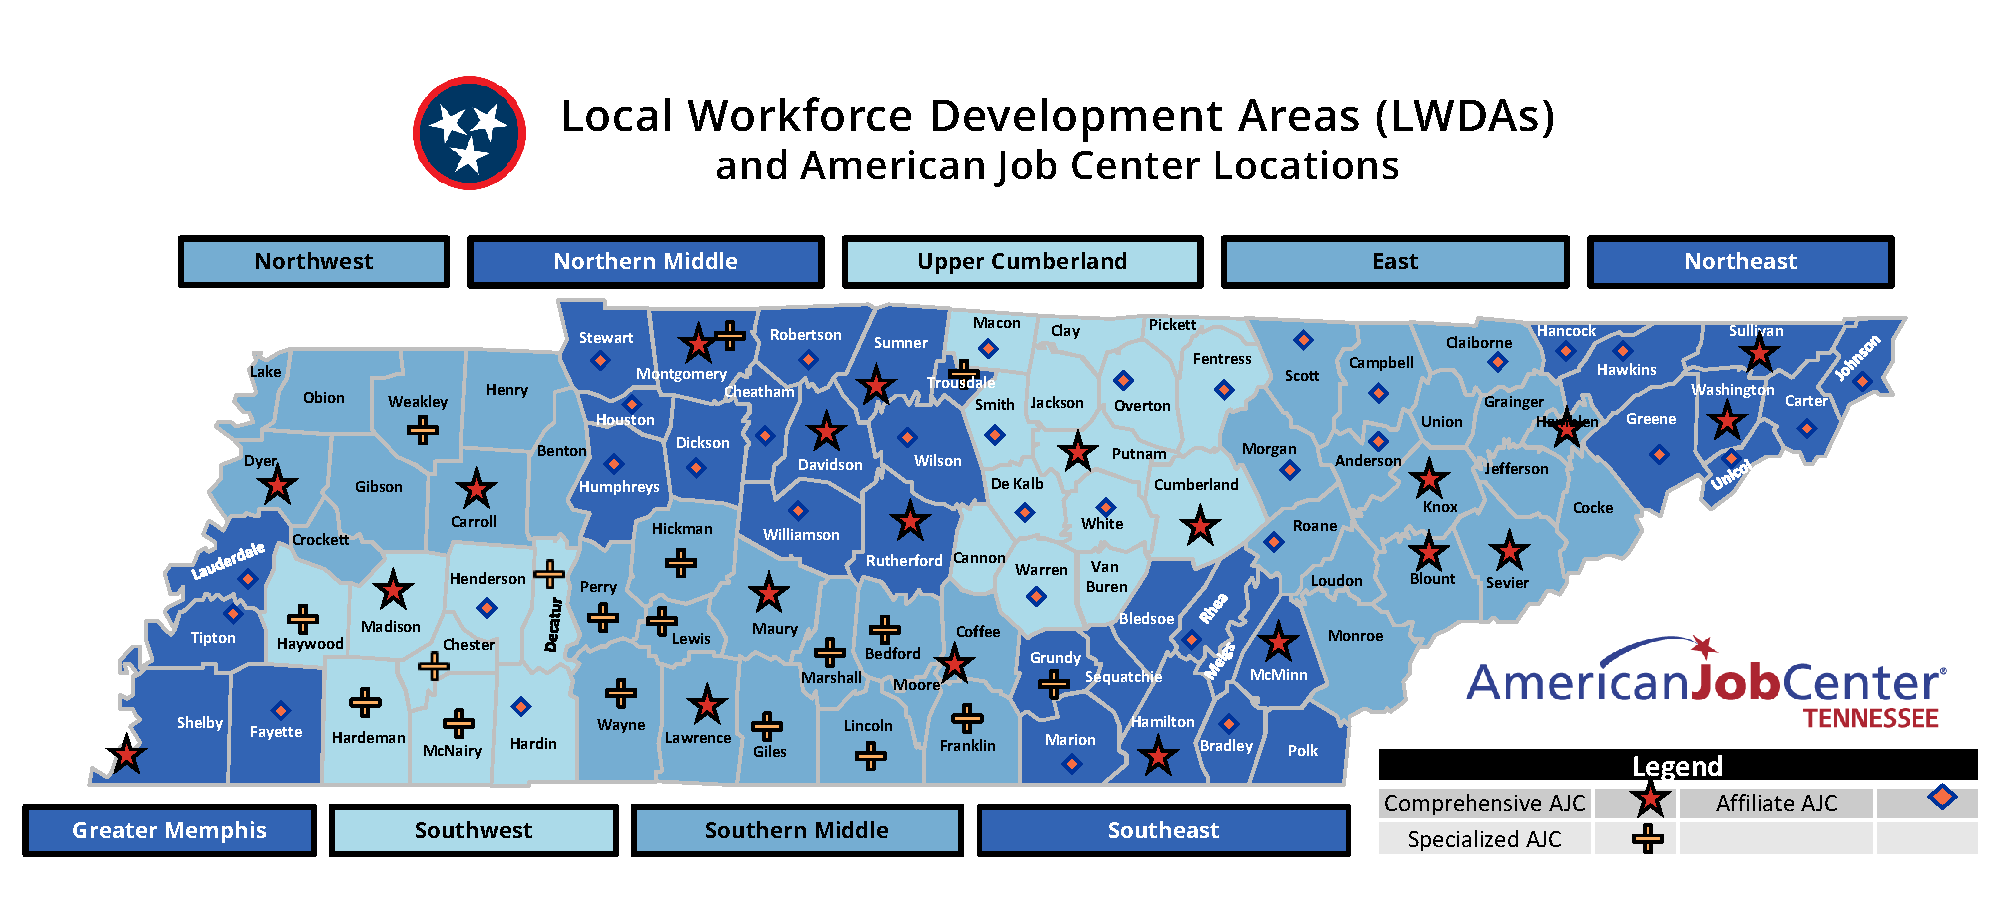 Middle Tennessee: Looking for EMPLOYMENT? Check out the